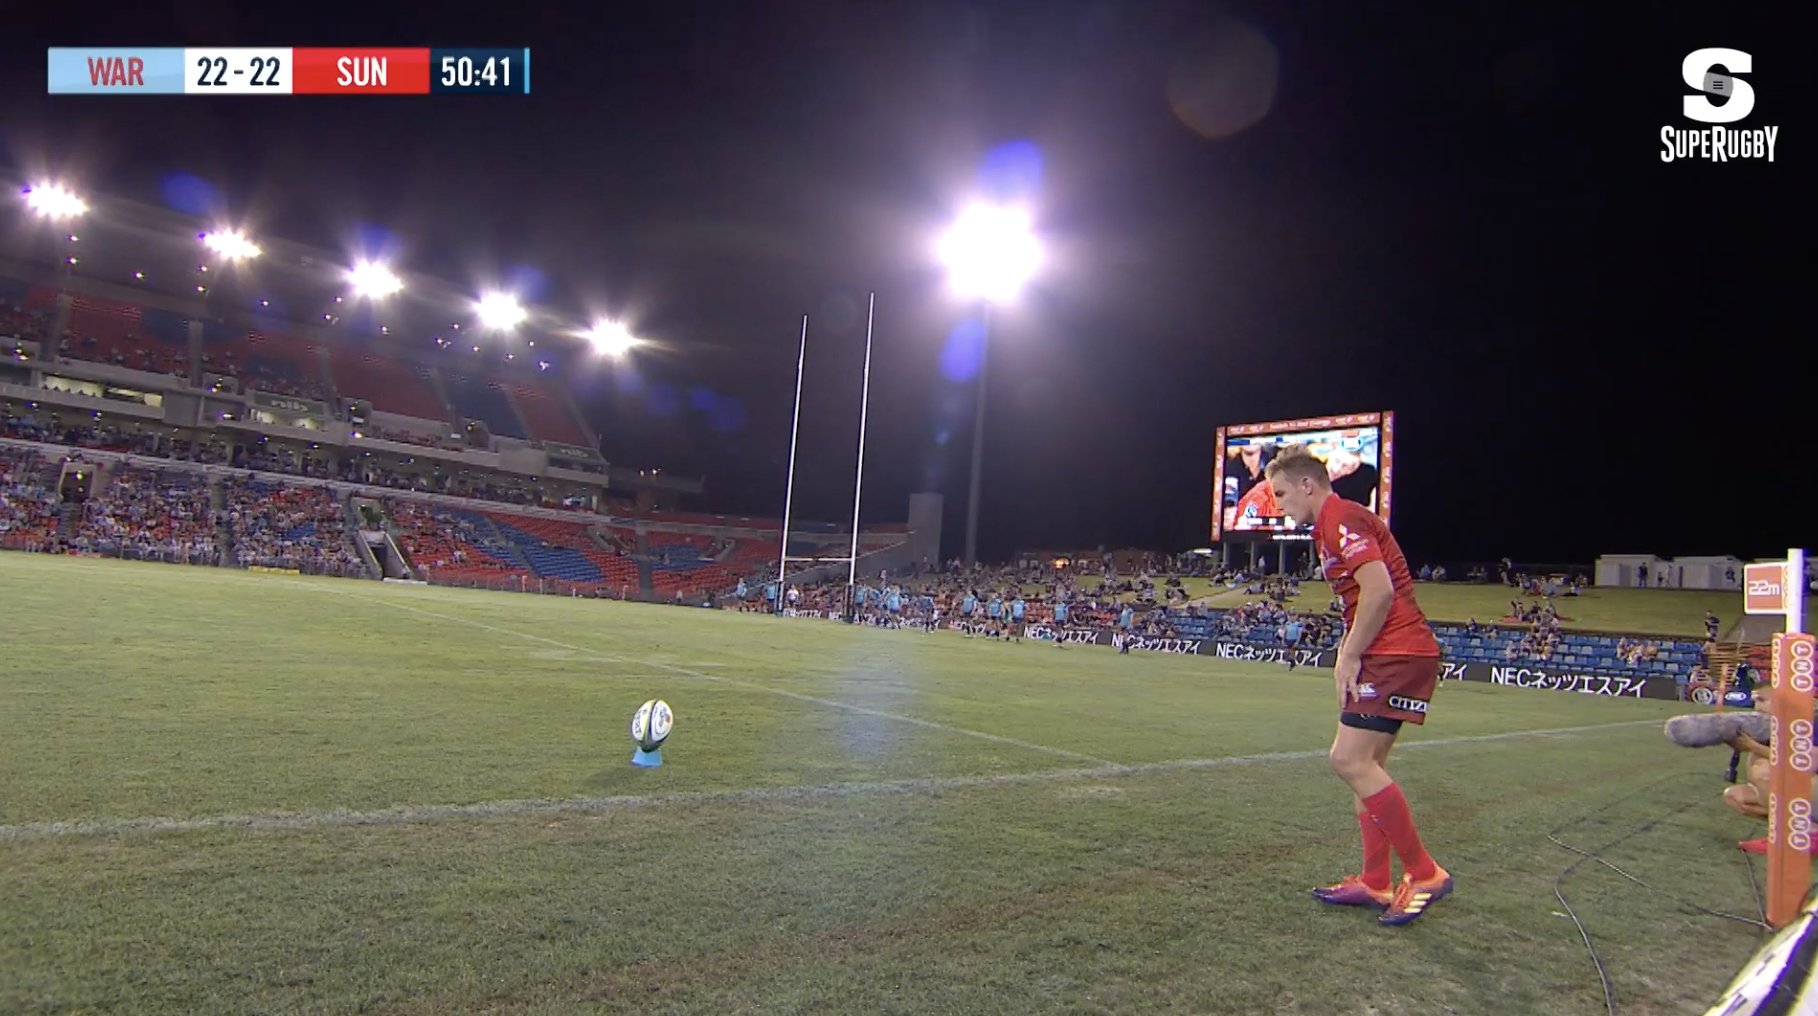 WATCH: Sunwolves fly-half scores one of the best conversion kicks we've seen in a long time